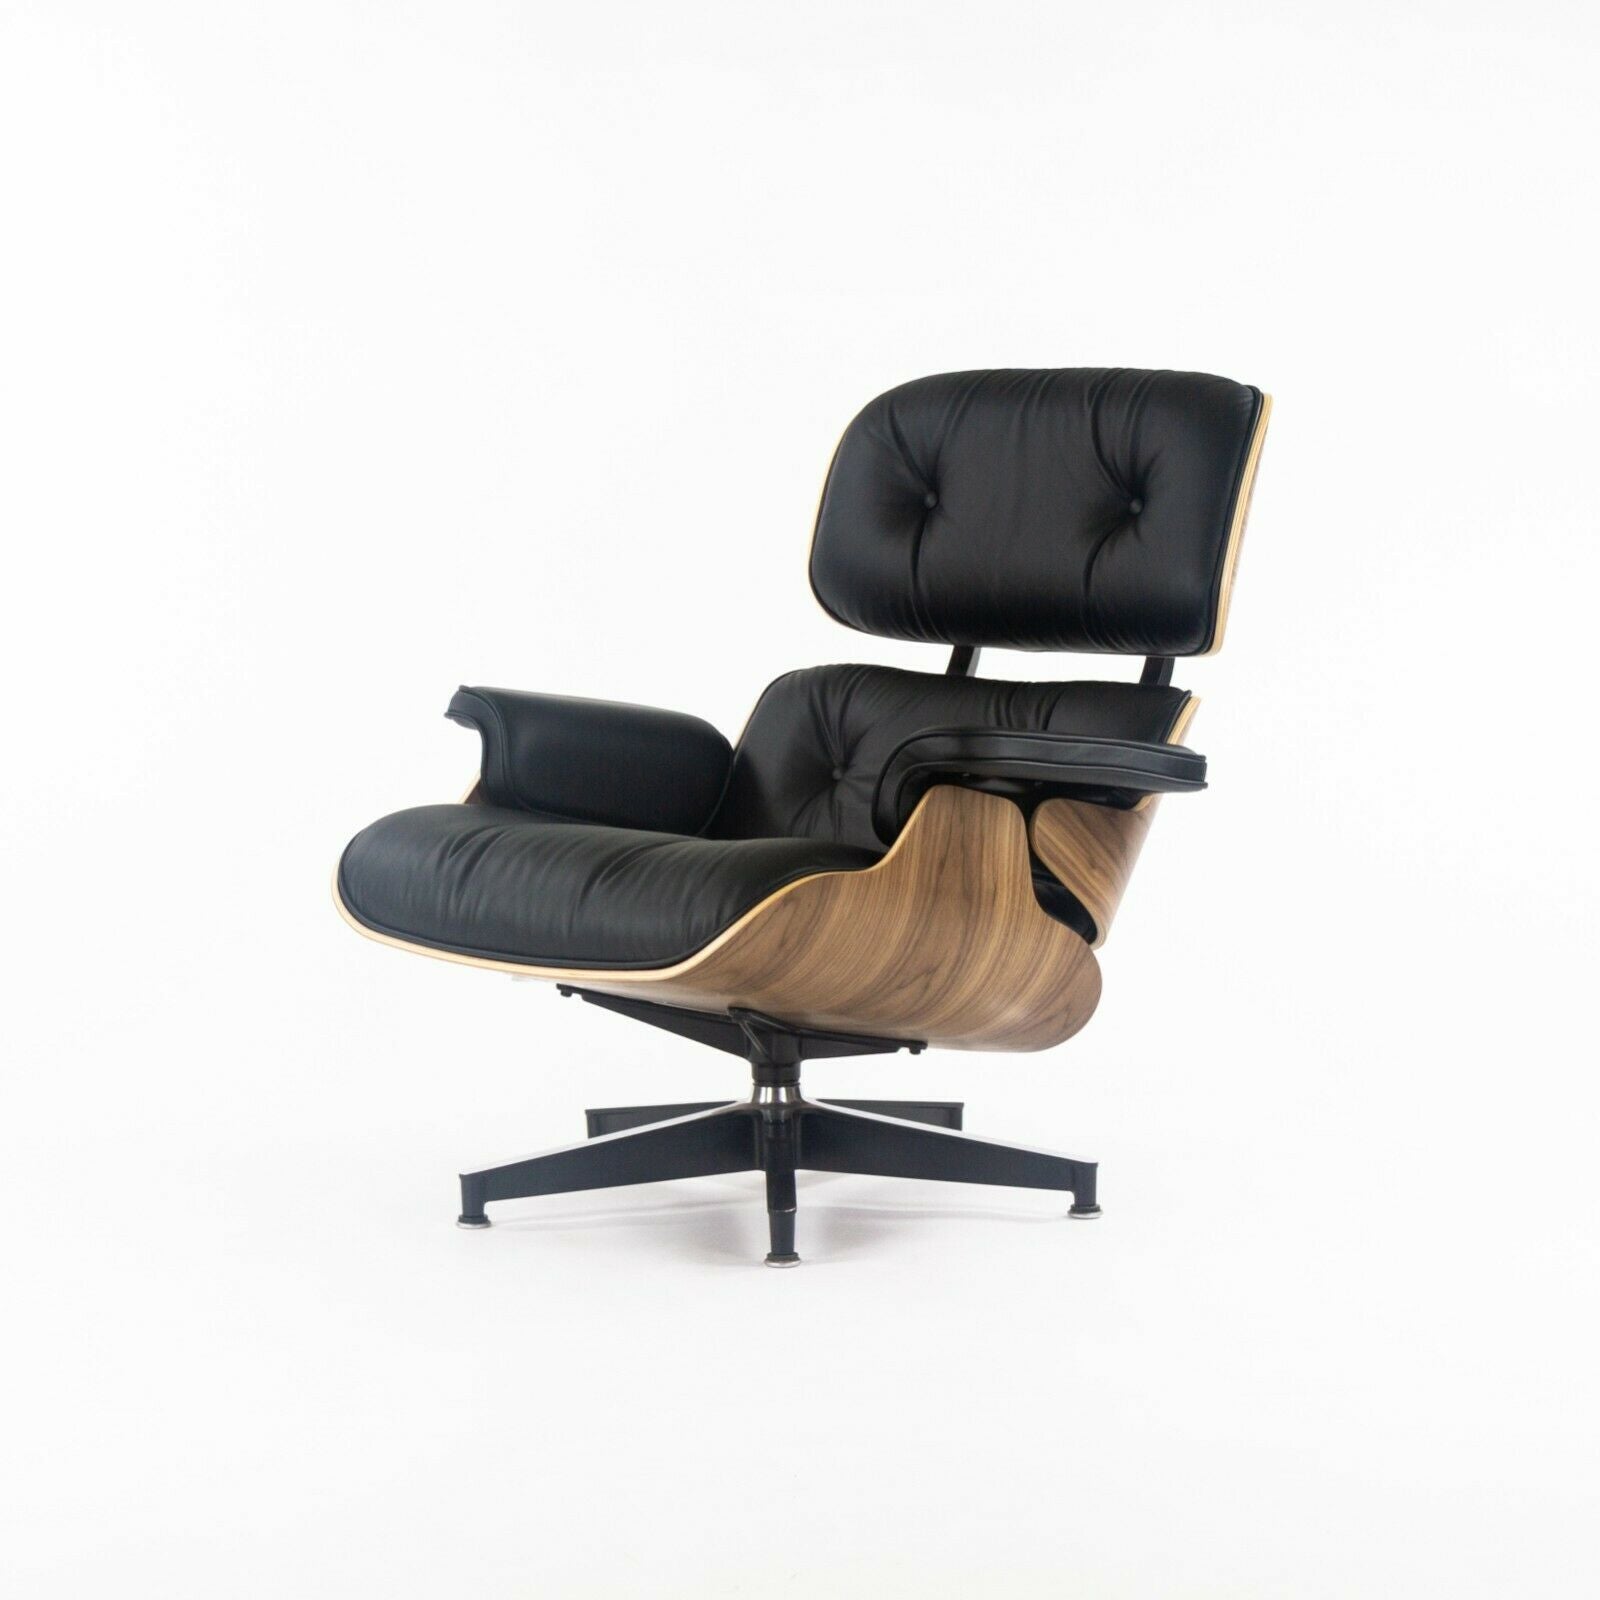 SOLD 2021 Herman Miller Eames Lounge Chair and Ottoman 670 671 Black Leather & Walnut